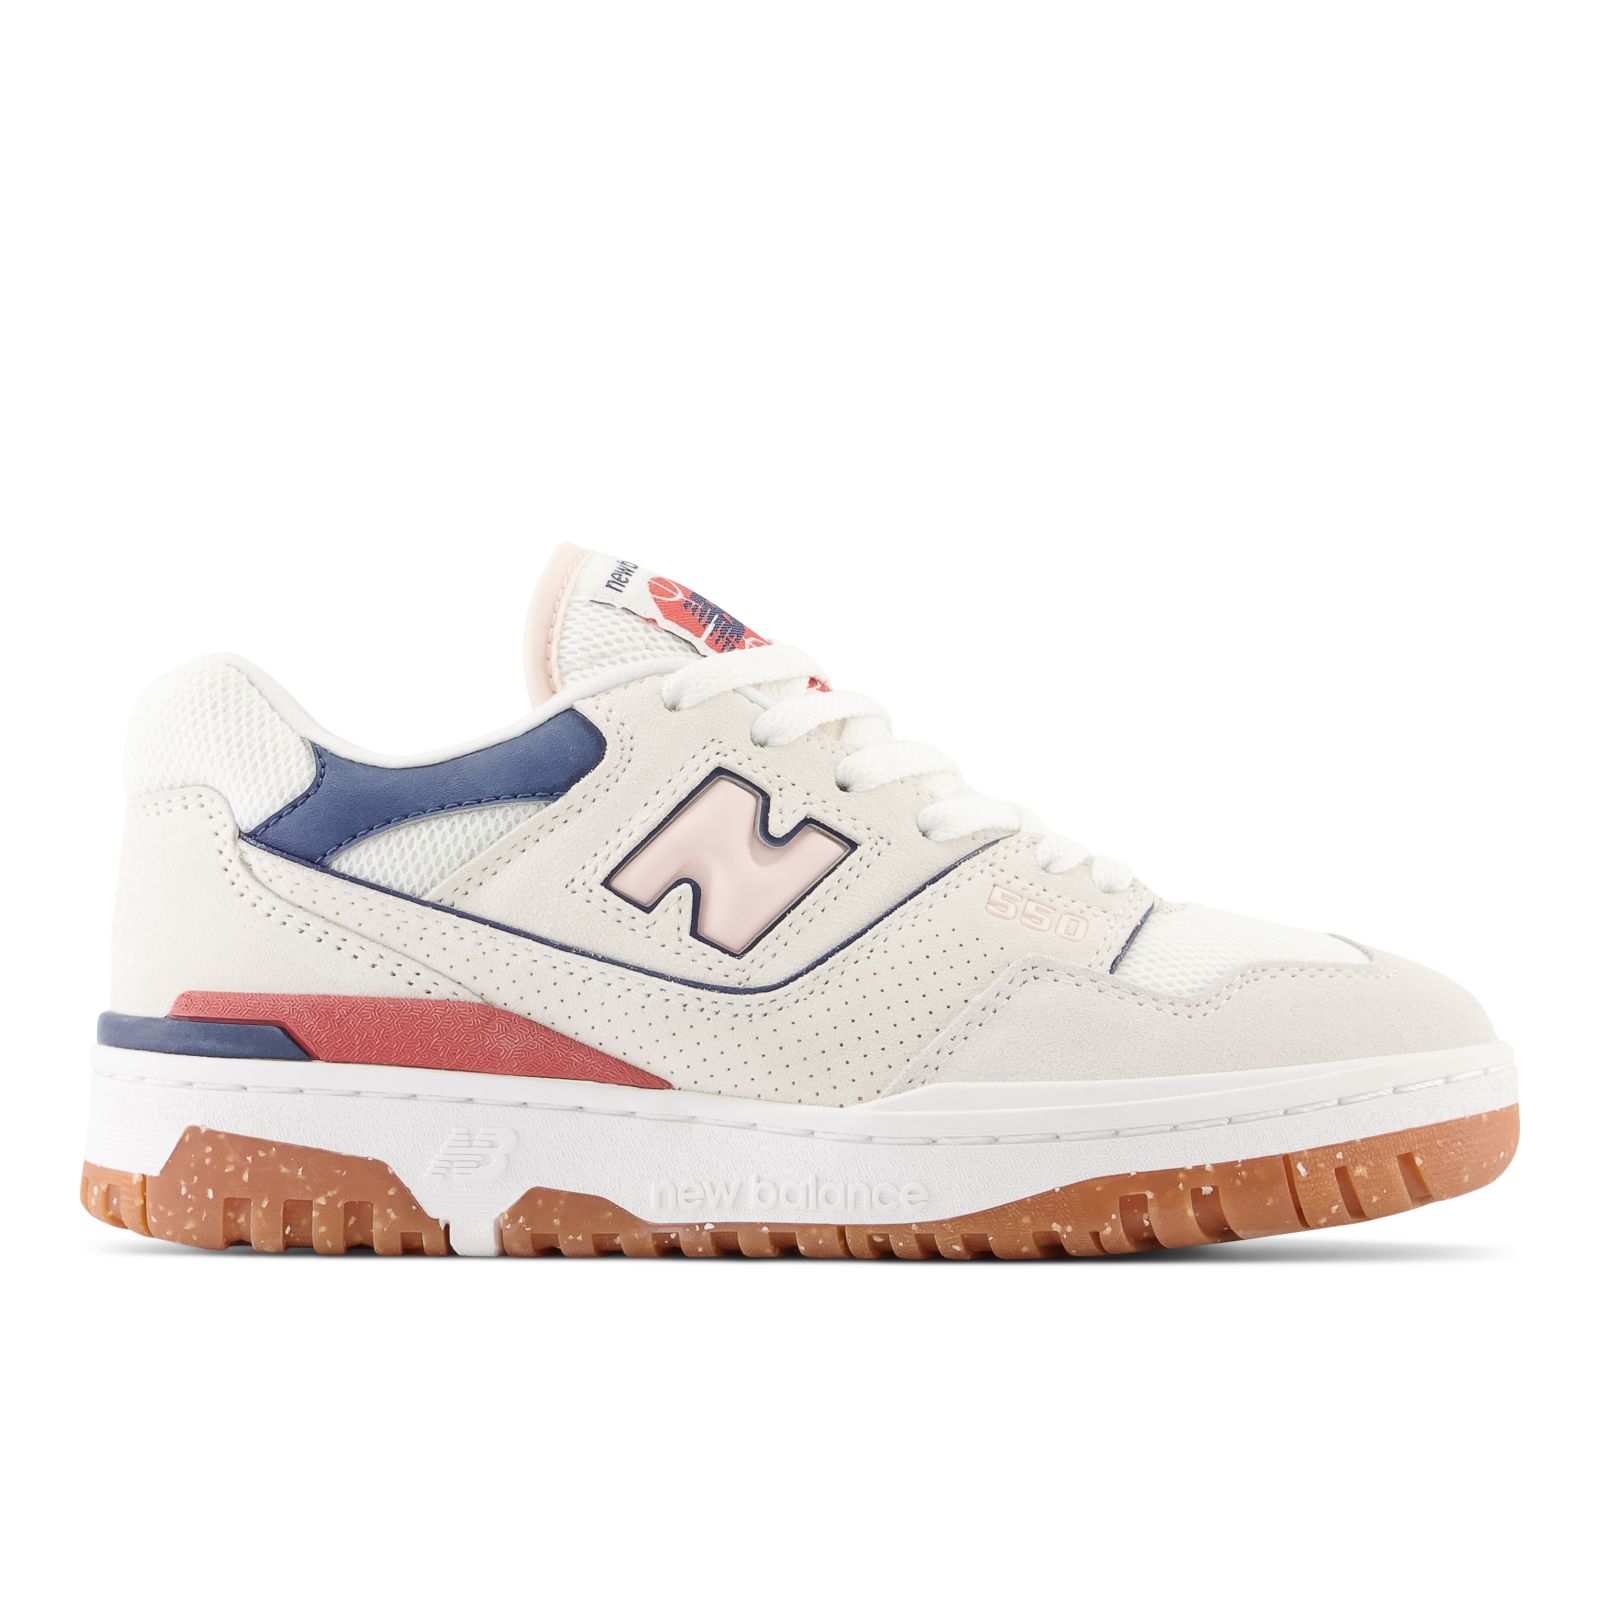 Is the New Balance 550 Good? New Balance 550 Varsity Gold Review